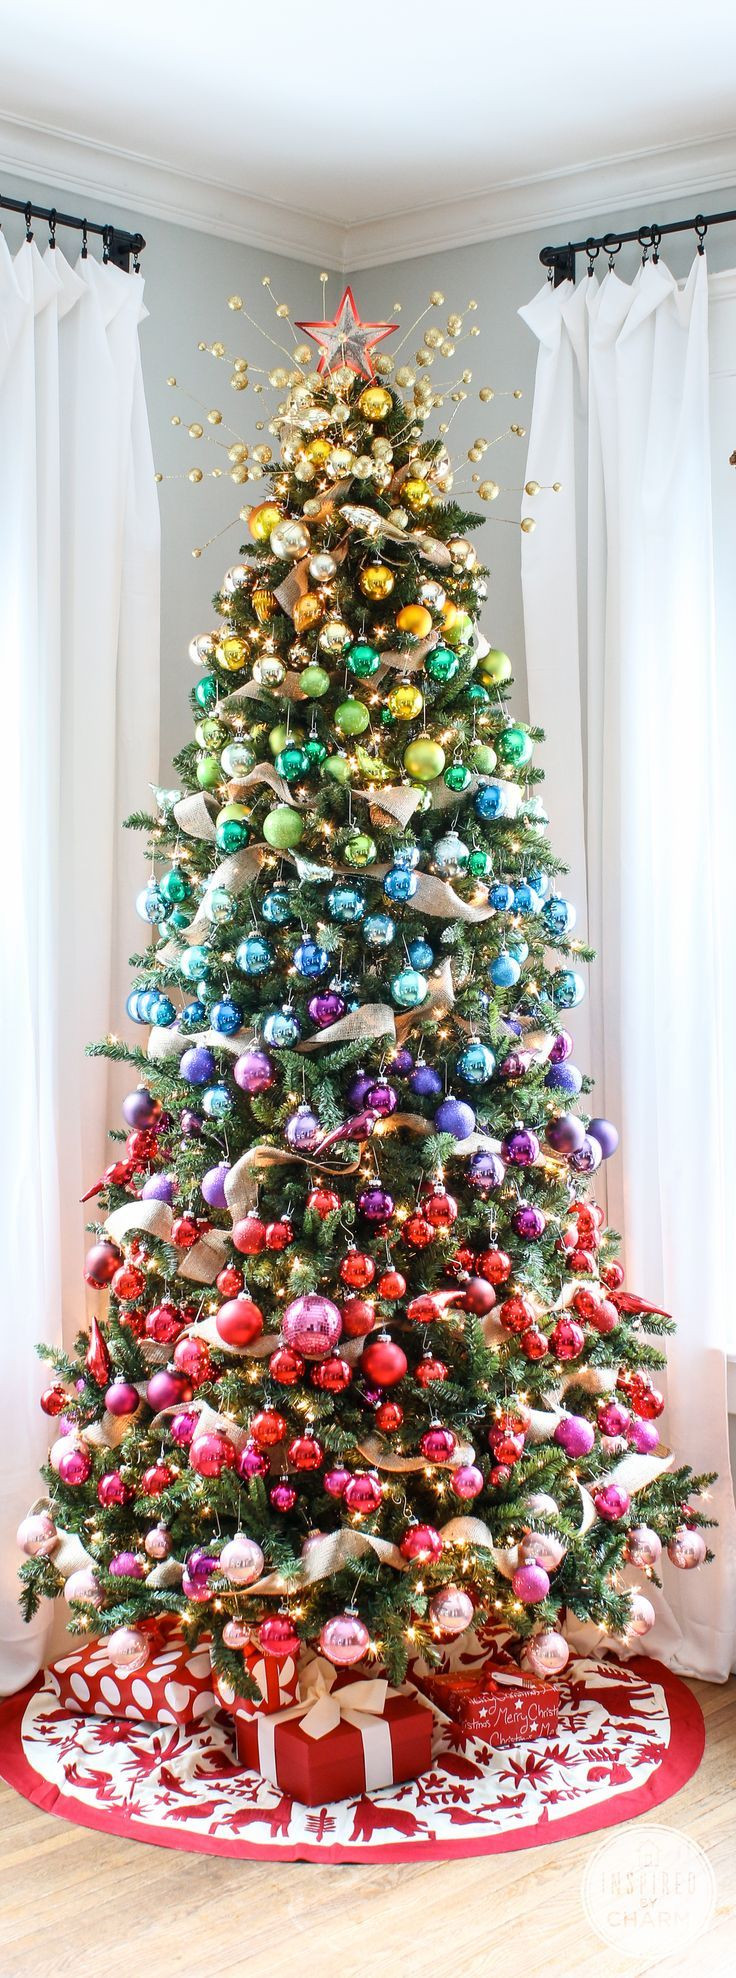 DIY Christmas Tree
 DIY Unique Christmas Trees Ideas You Should Try This Year